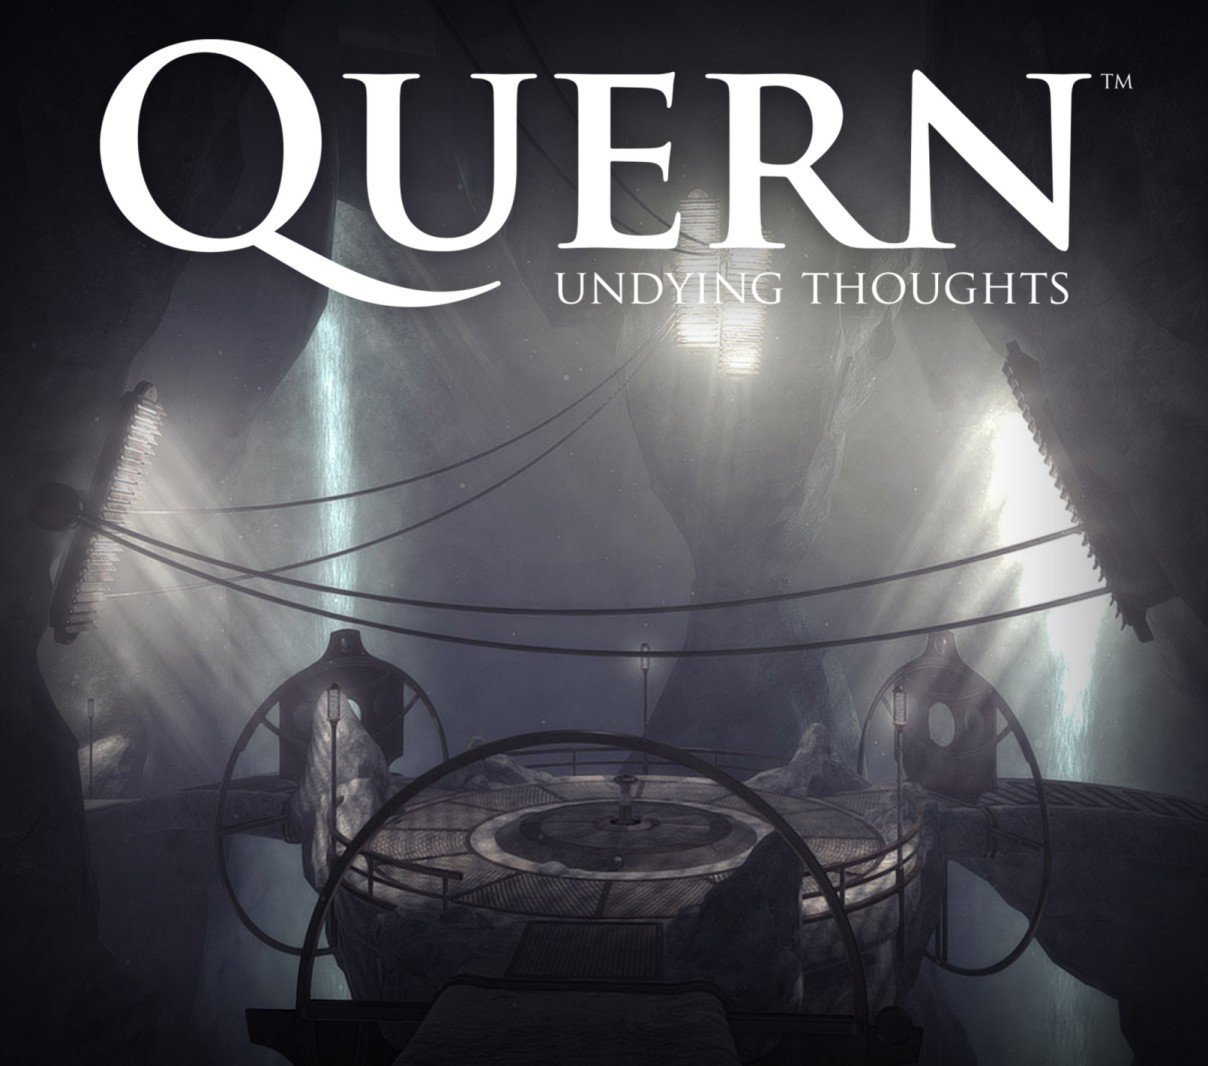 quern xbox download free